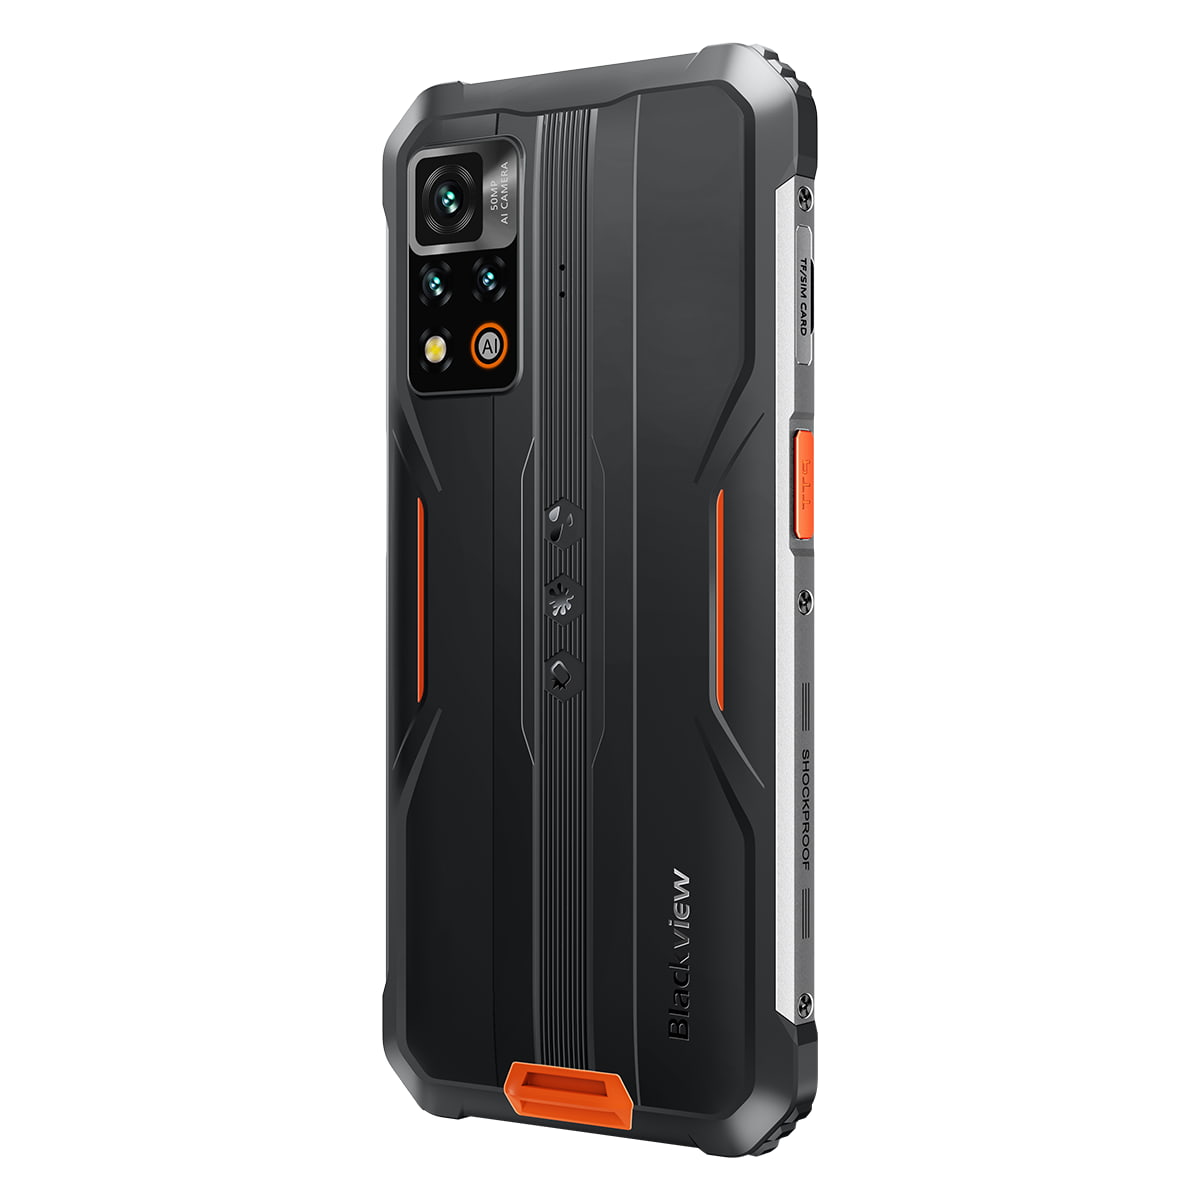 Blackview BV9200 Smartphone Rugged - 2023 Nuovi Lanci - Android 12, Photo 50 Mpx,NFC,8+256GB,Ricarica wireless